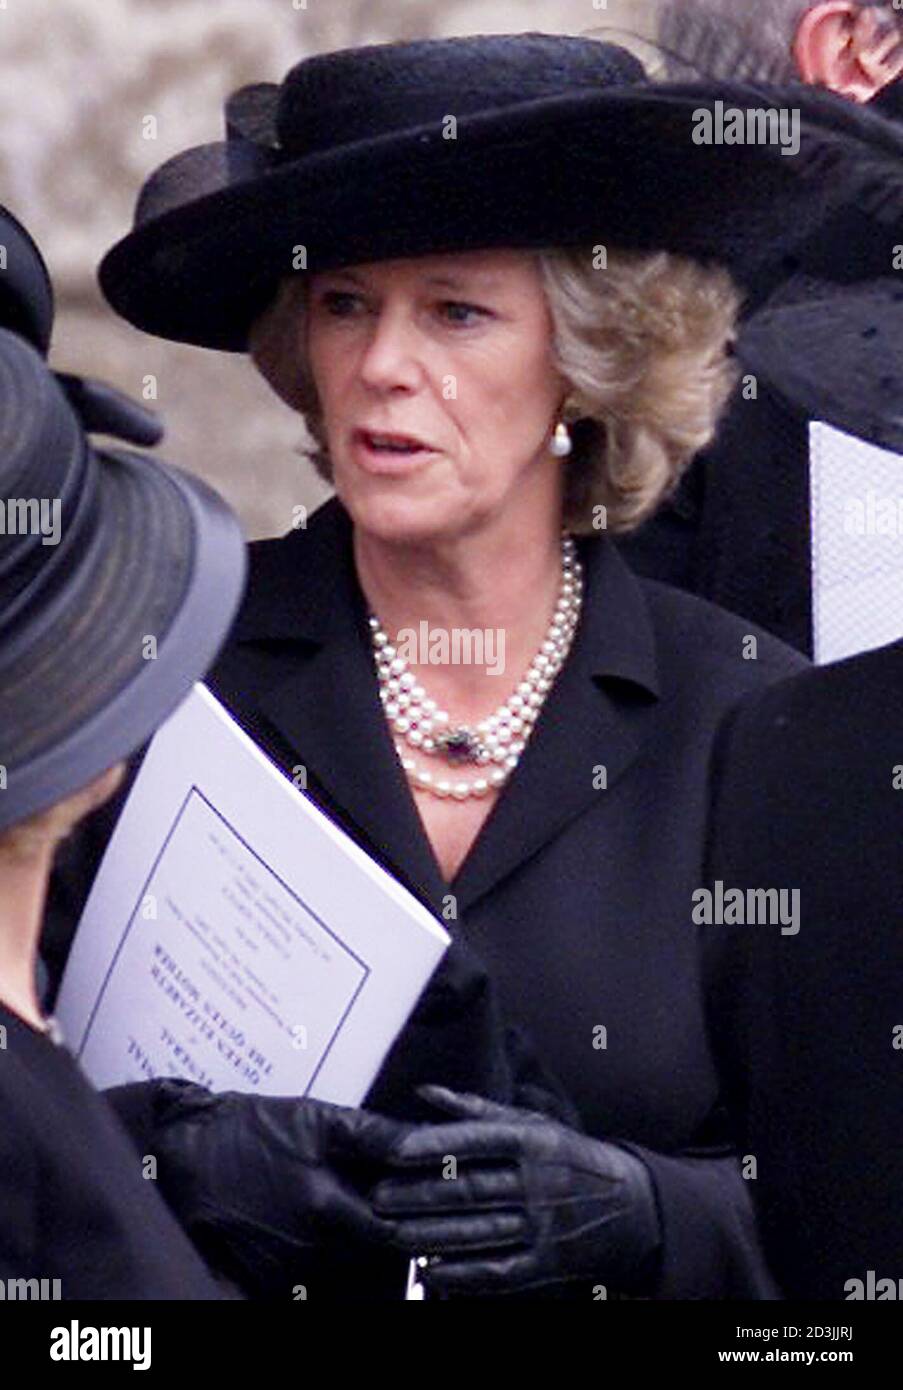 Camilla Parker-Bowles leaves London's Westminster Abbey after the funeral  of the Queen Mother, April 9, 2002. Royal dignitaries and politicians from  around the world have gathered at Westminster Abbey to pay their